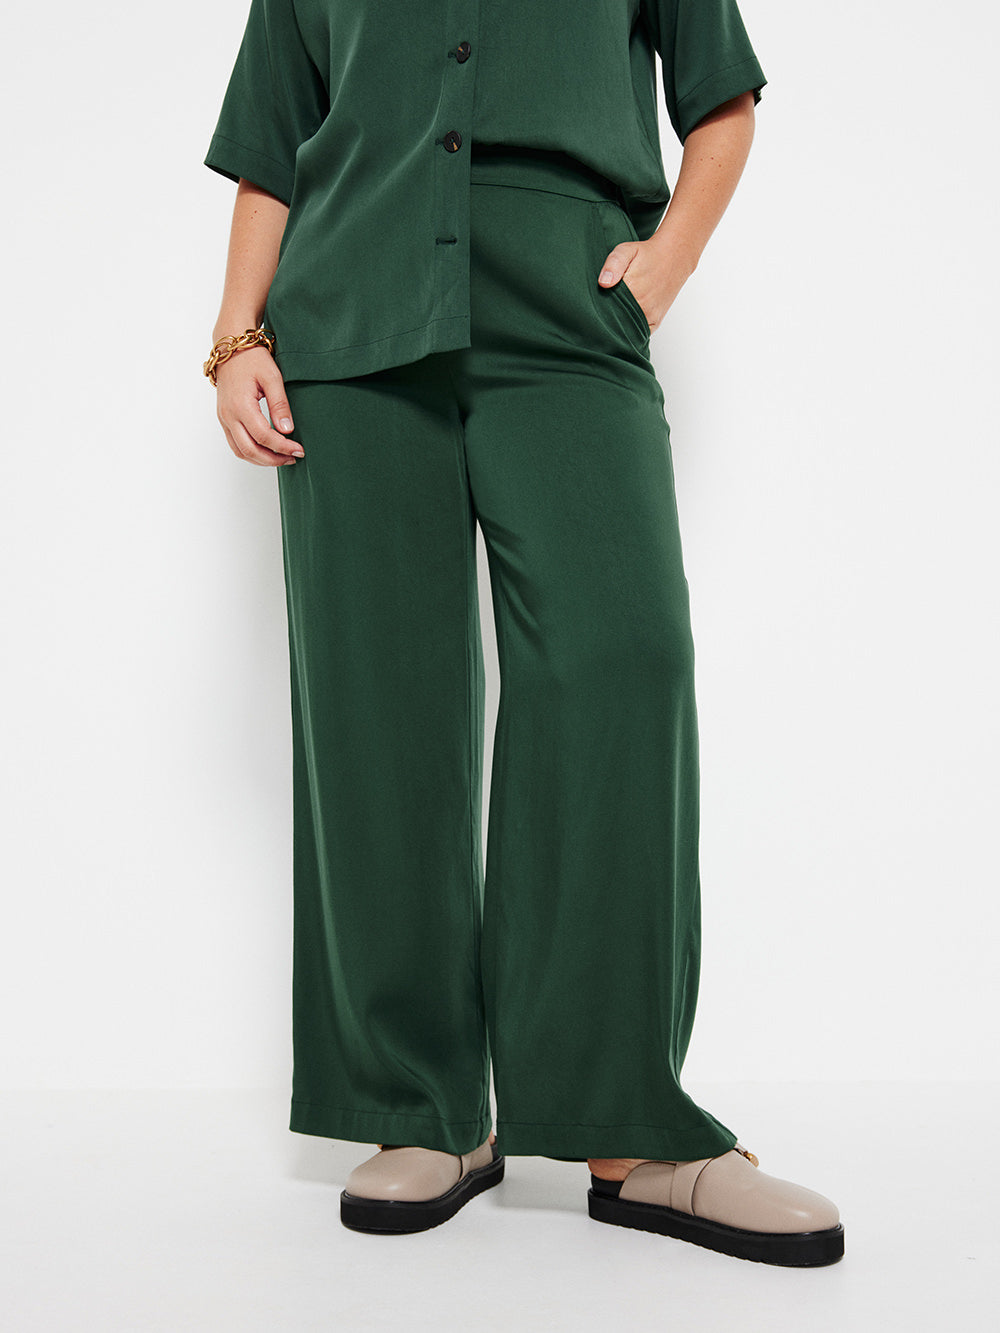 The Stretch Draped Pant